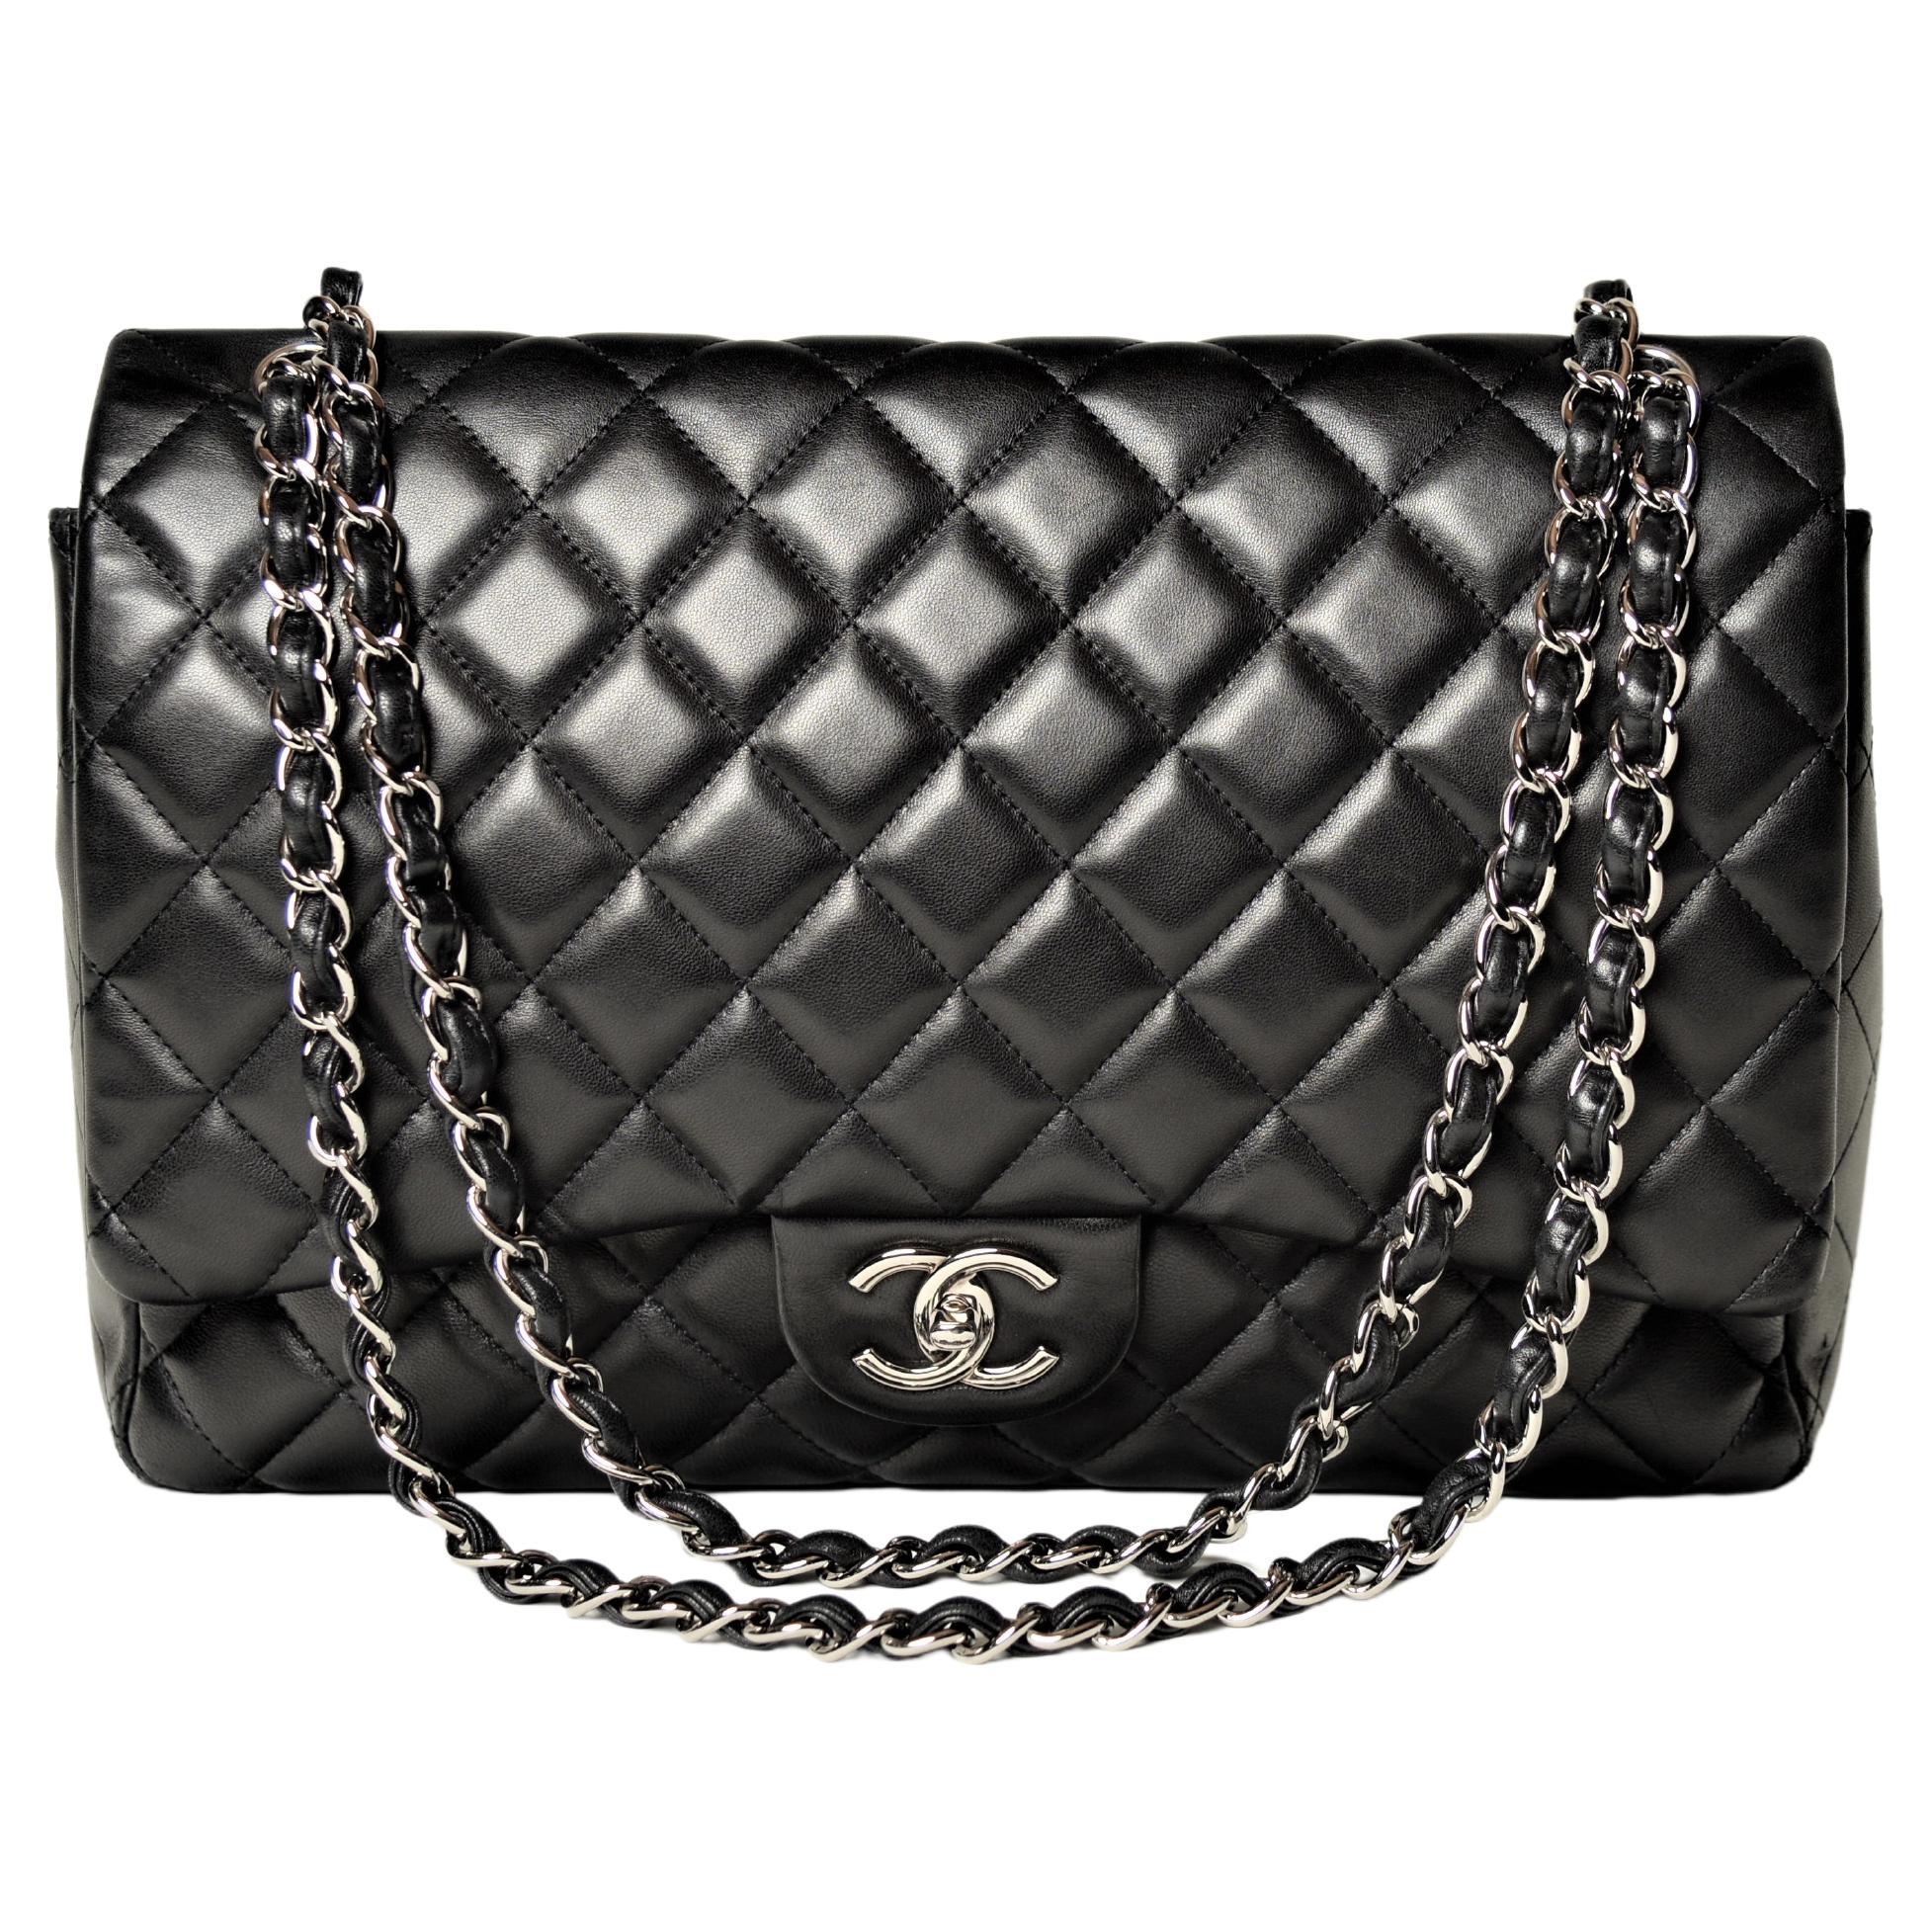 Chanel Classic Jumbo Maxi Flap Black Quilted Lambskin Leather Bag